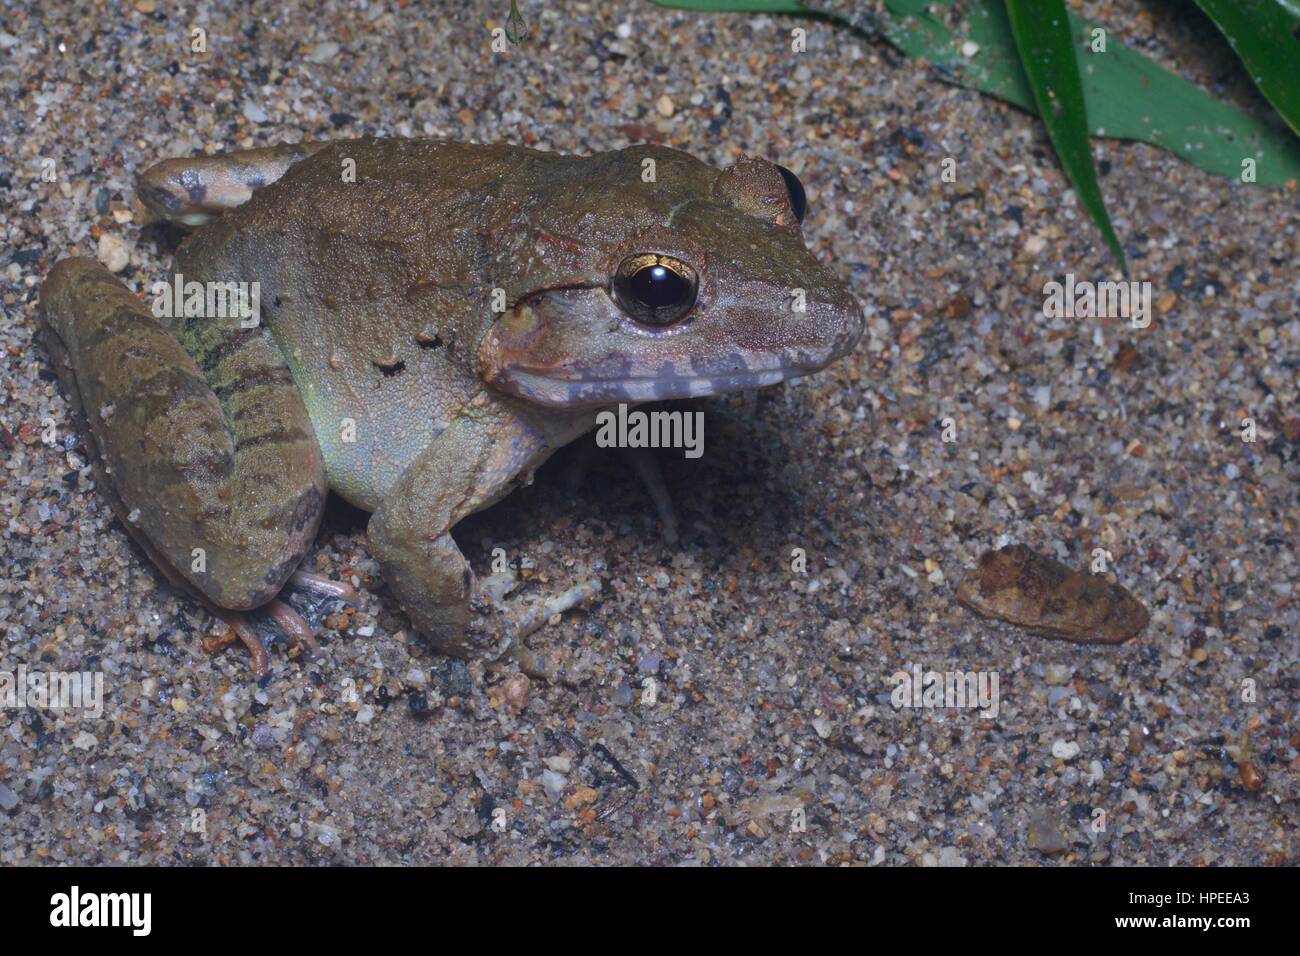 A Giant River Frog (Limnonectes blythii) in the rainforest at night in Batang Kali, Selangor, Malaysia Stock Photo